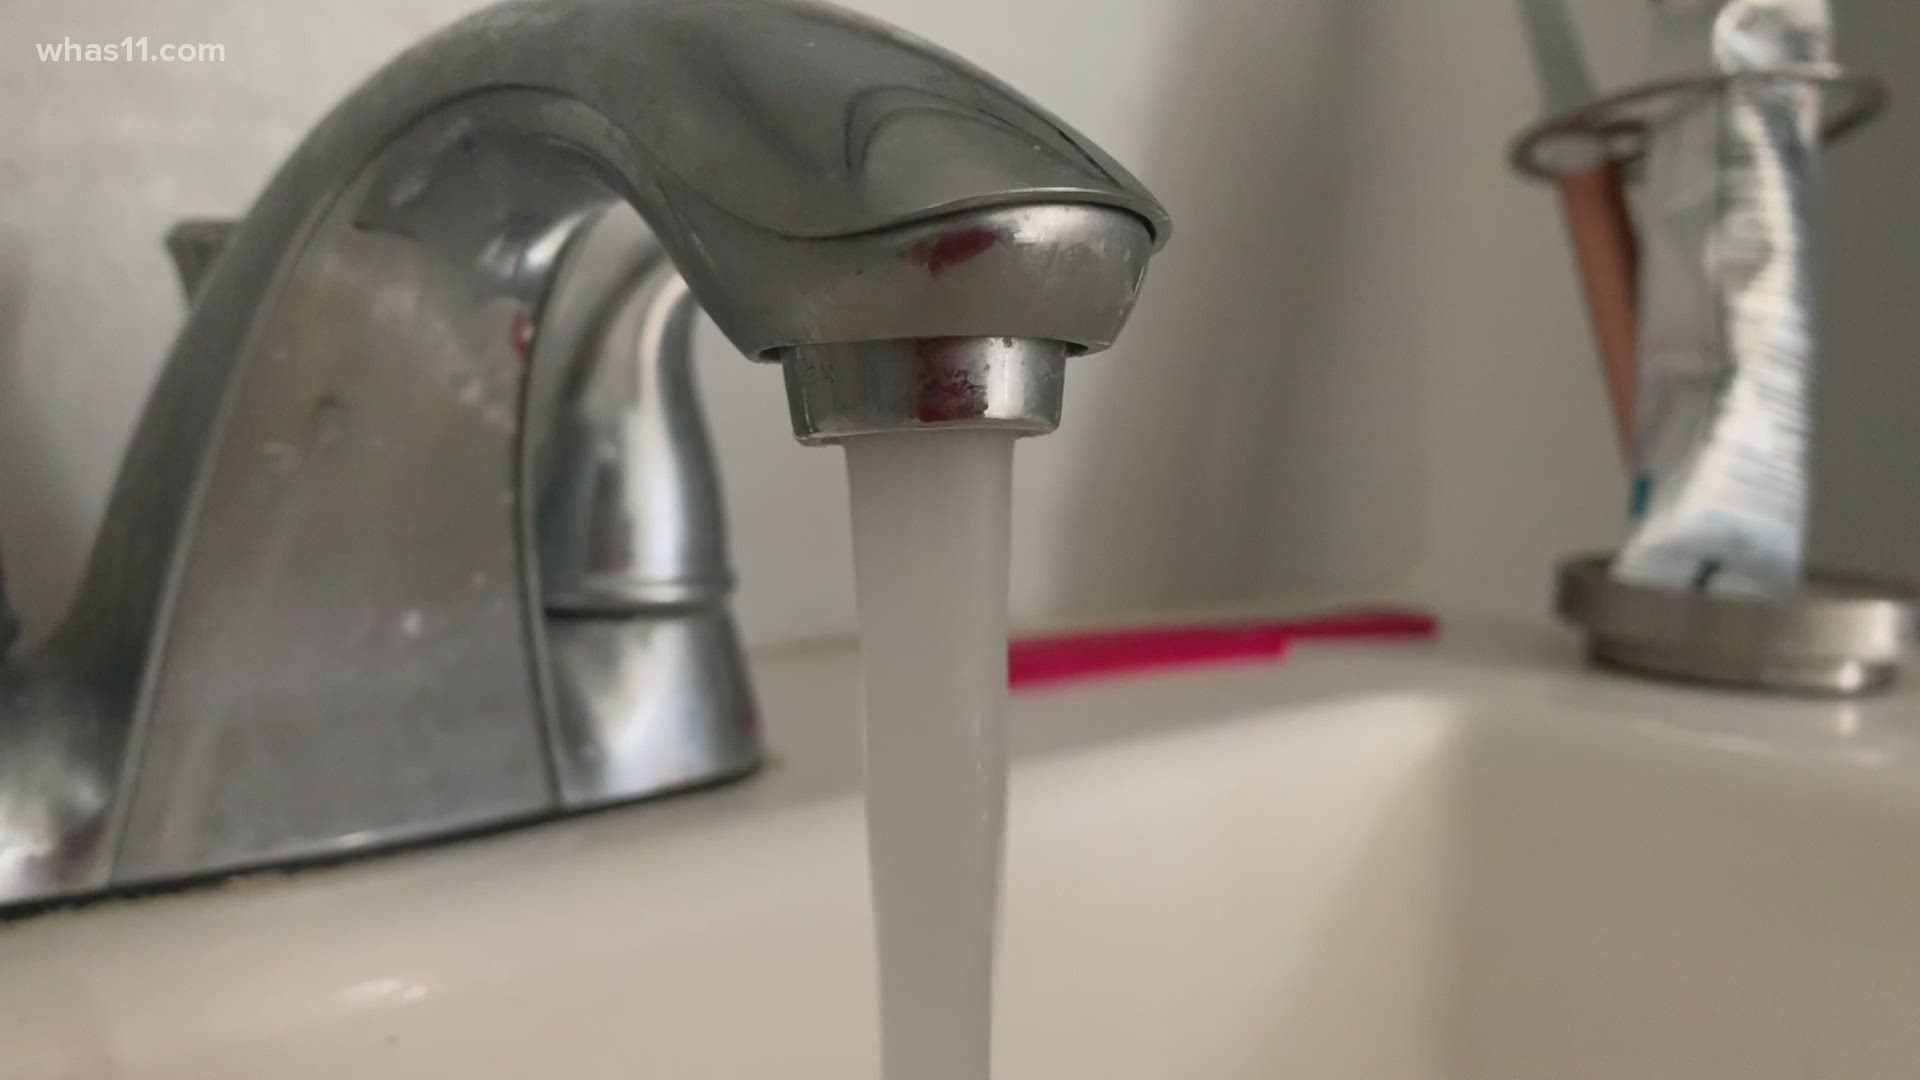 When temperatures drop, there are a few steps you can take to protect your plumbing.